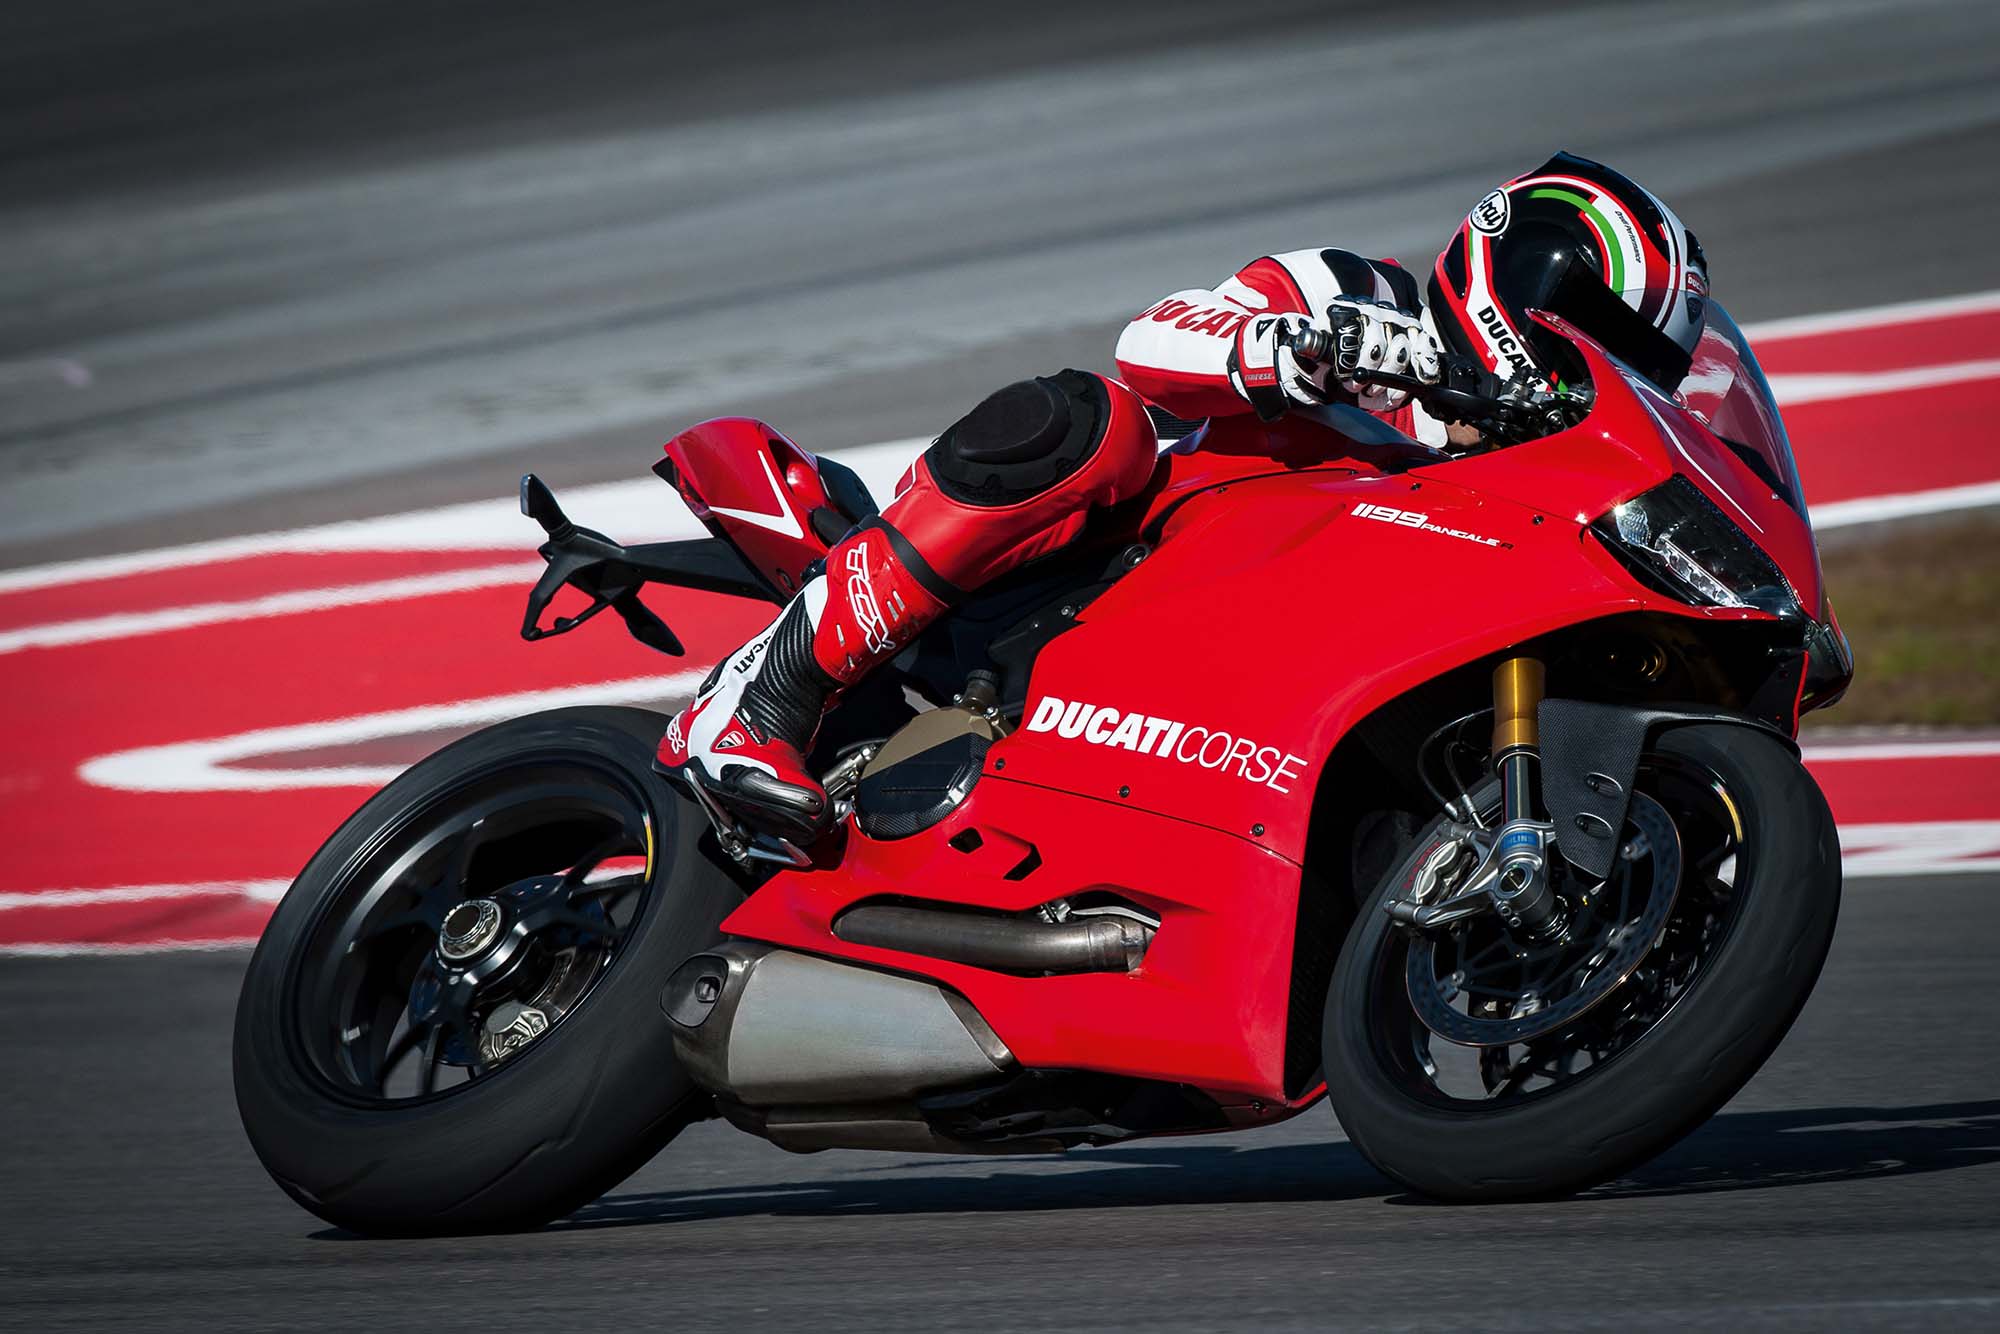 101 Photos Of The Ducati 1199 Panigale R Asphalt And Rubber